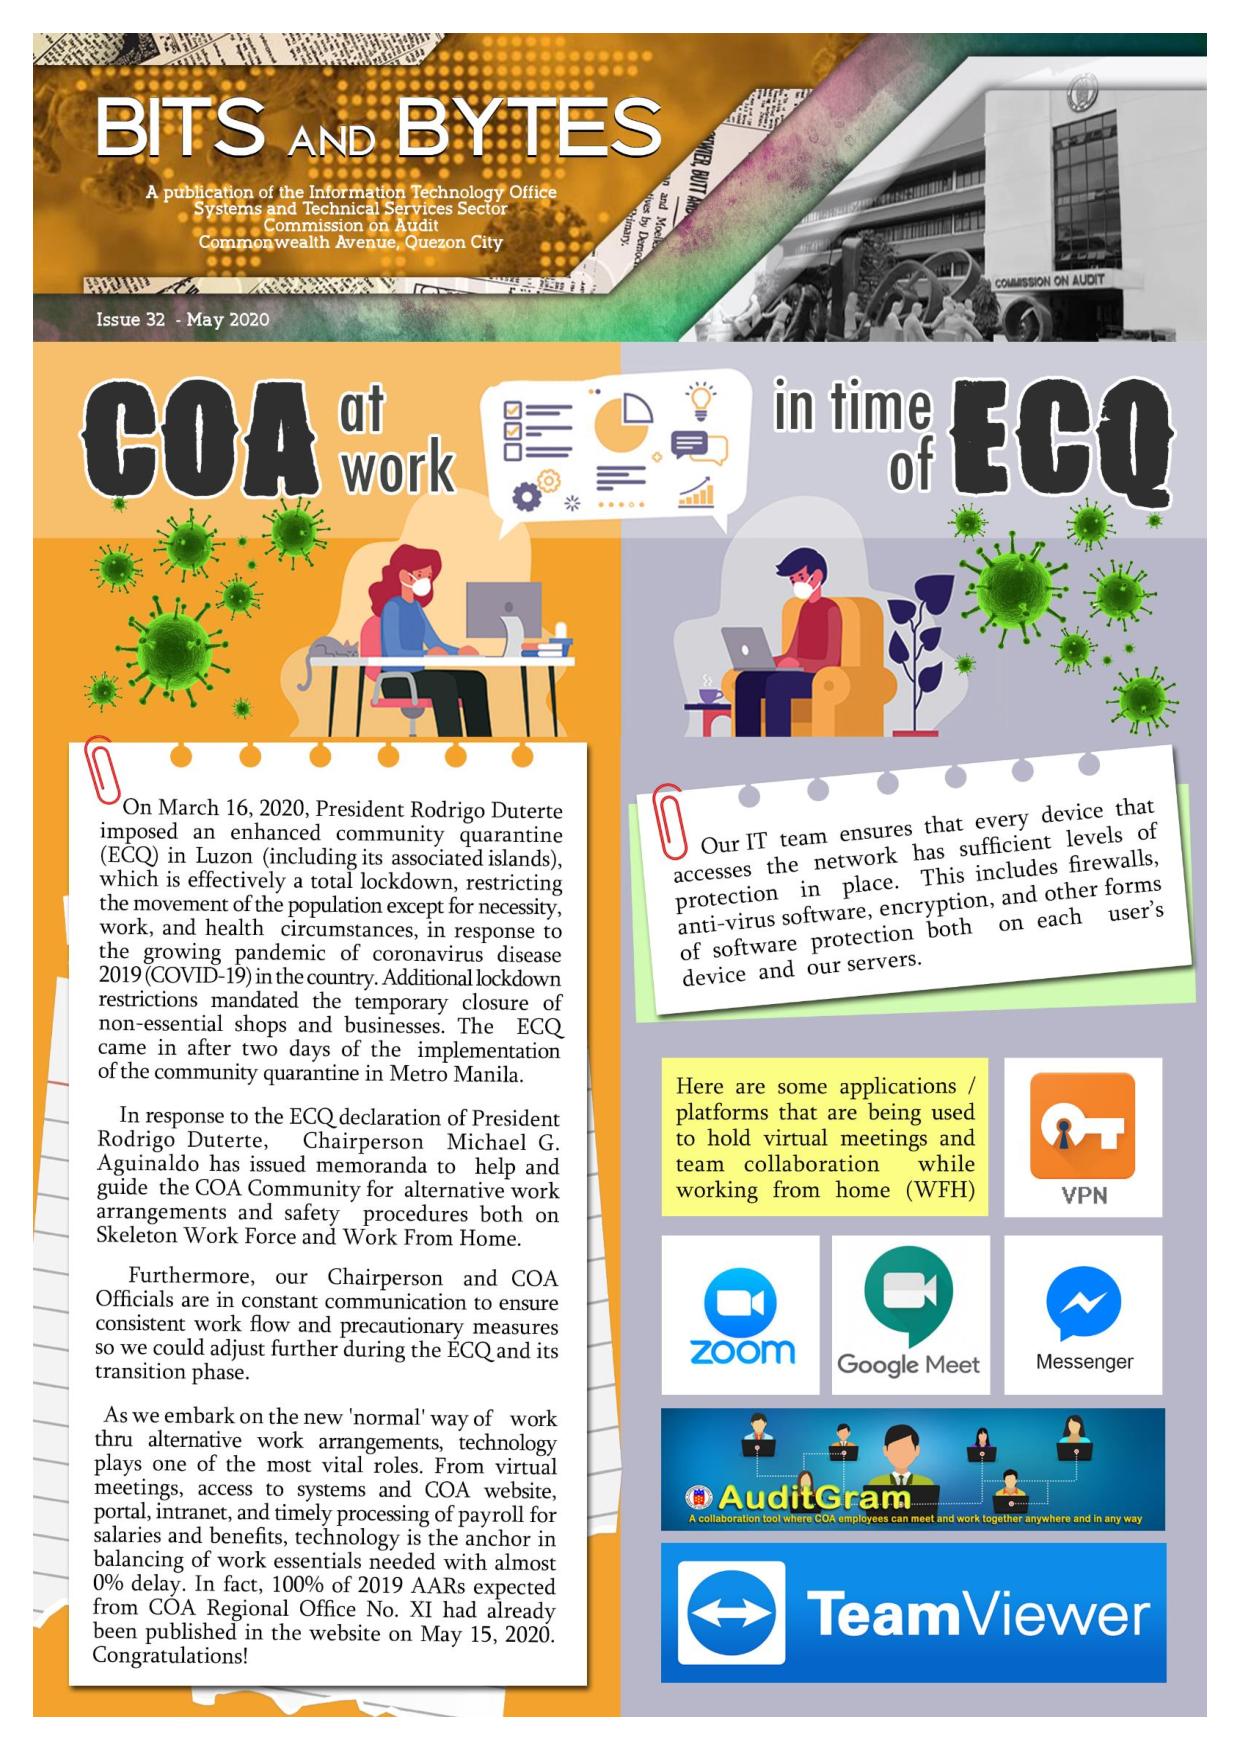 Bits and Bytes Issue 32 COA at Work in time of ECQ page 001